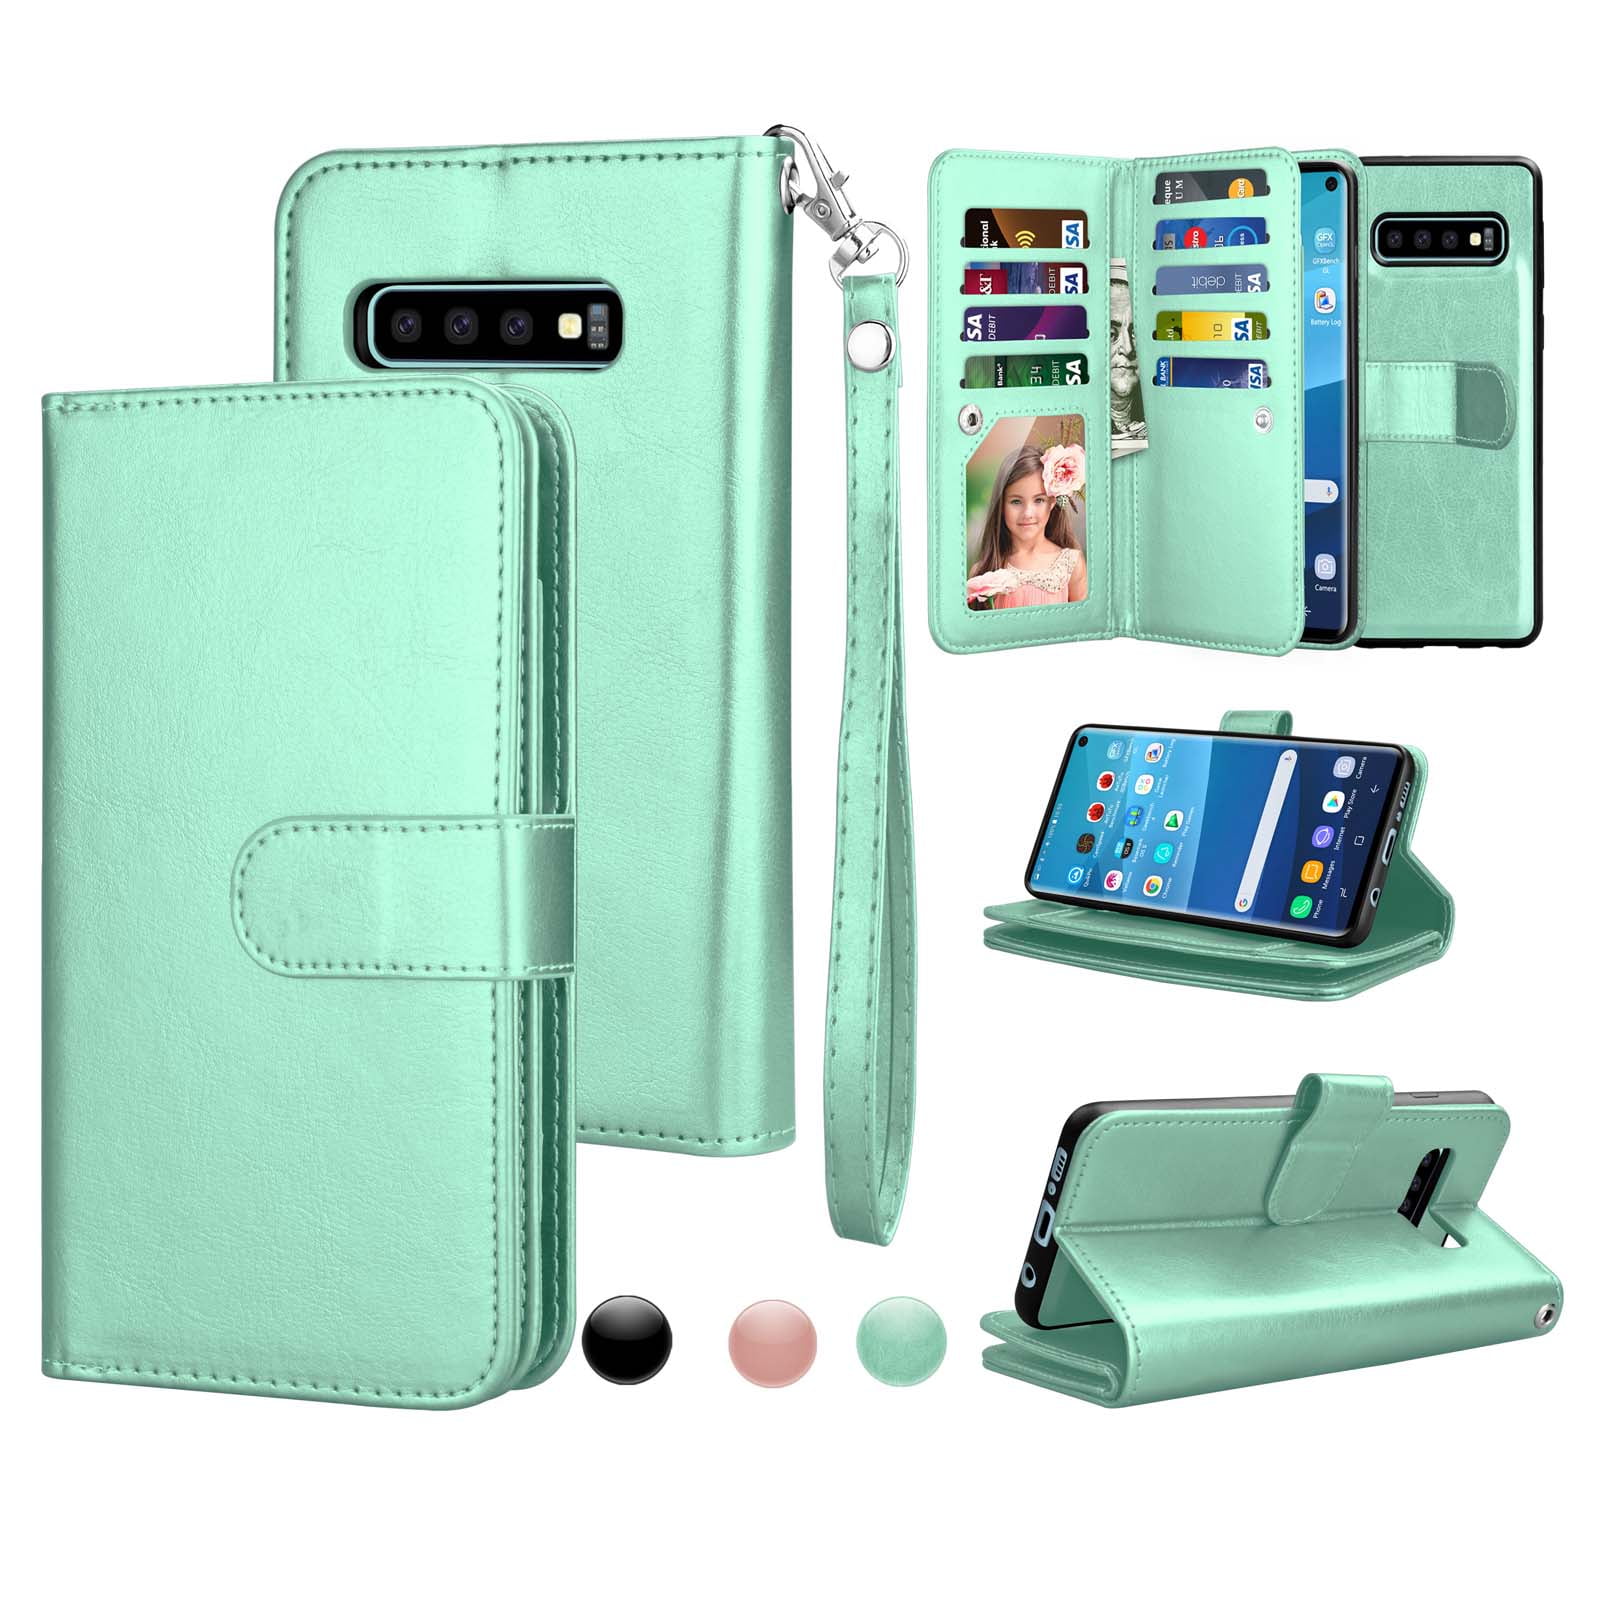 Leather Cover Compatible with Samsung Galaxy S10 Premium Green Wallet Case for Samsung Galaxy S10